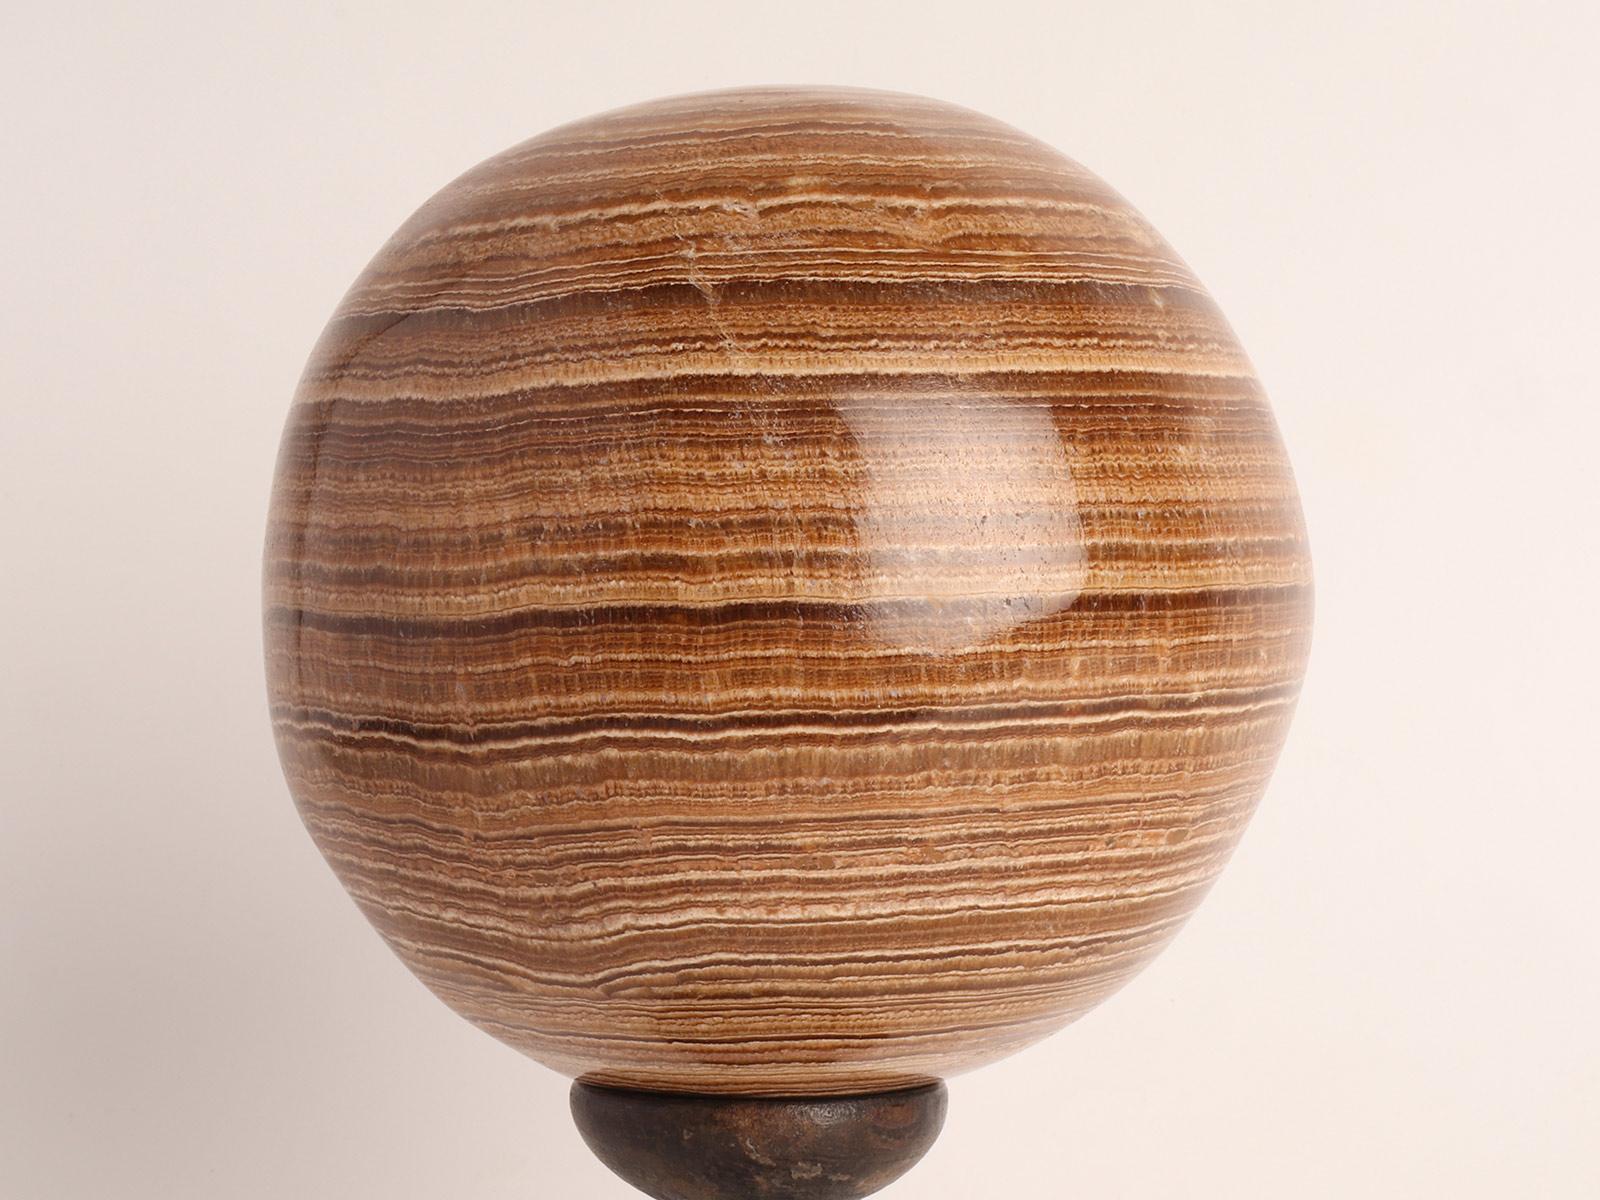 A wunderkammer Grand Tour's souvenir. A sphere of Aragonite stone, resting on a base, made out of ebonized wood that has a column with a wavy profile that opens upwards with a concave top. Italy circa 1870.